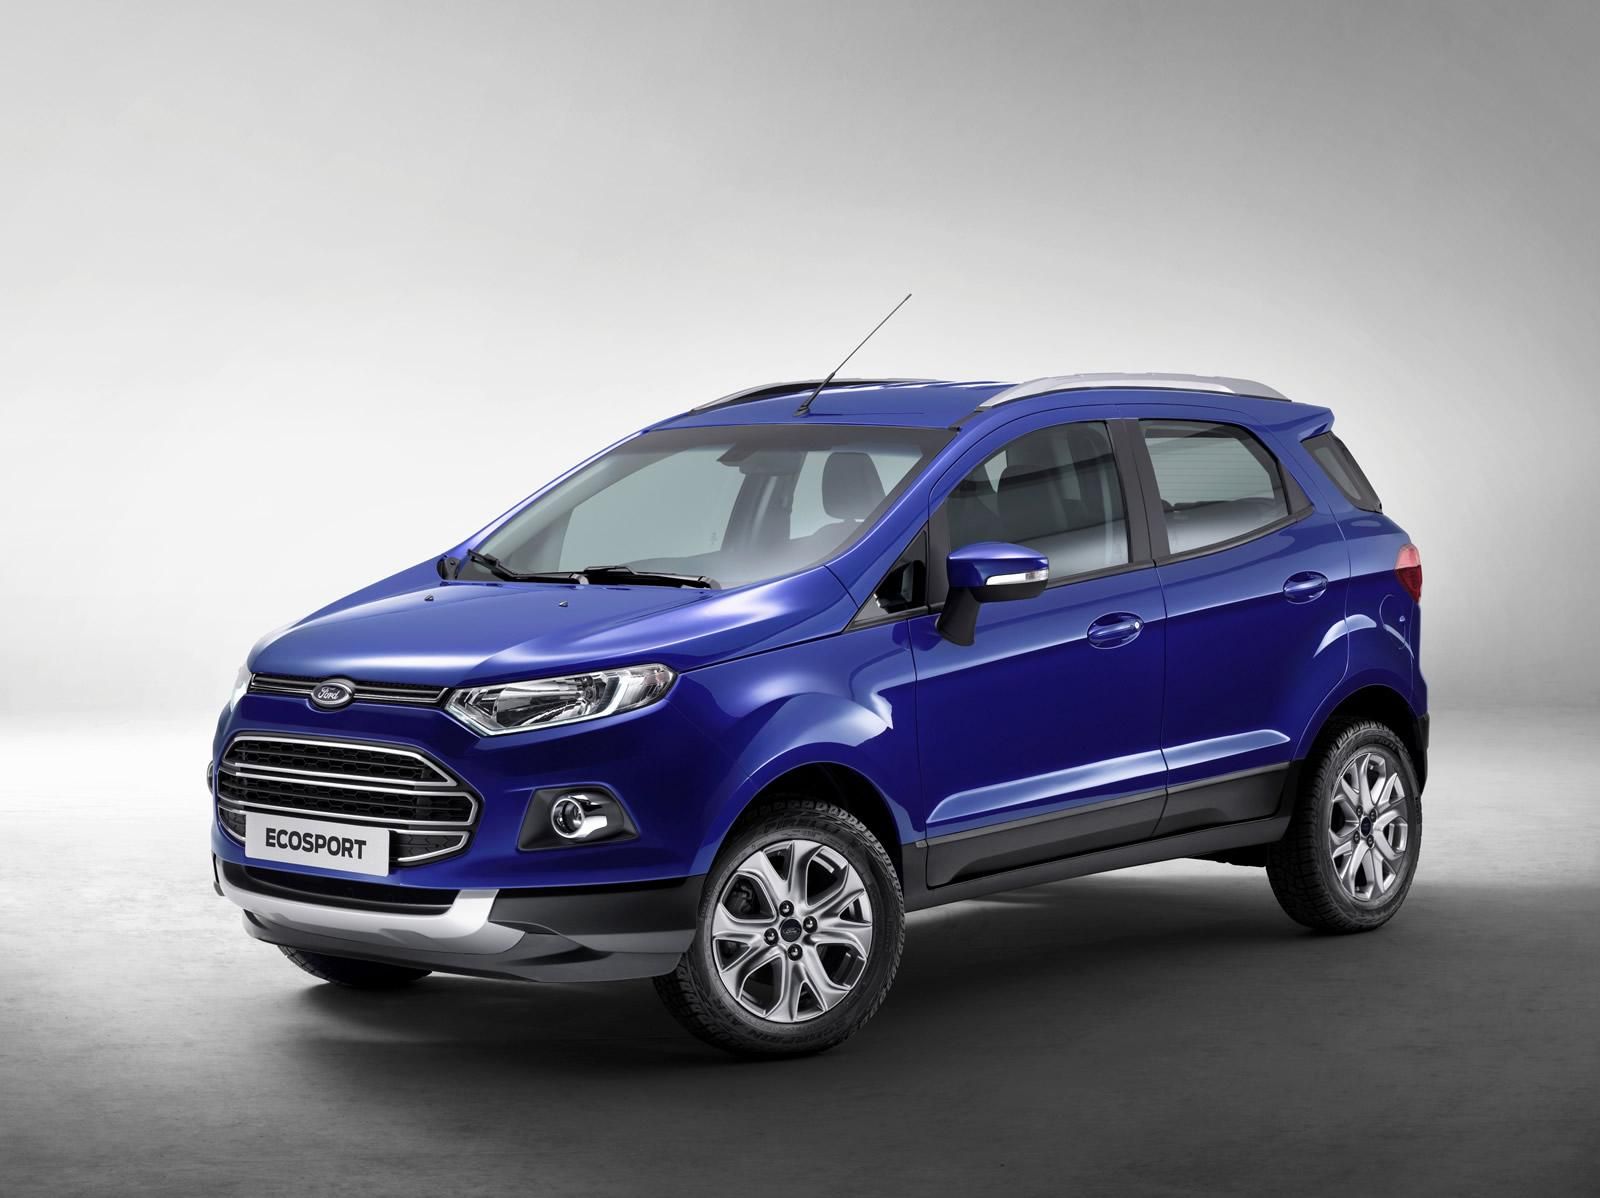 FORD ECOSPORT LMTED EDTON RESM GALERS